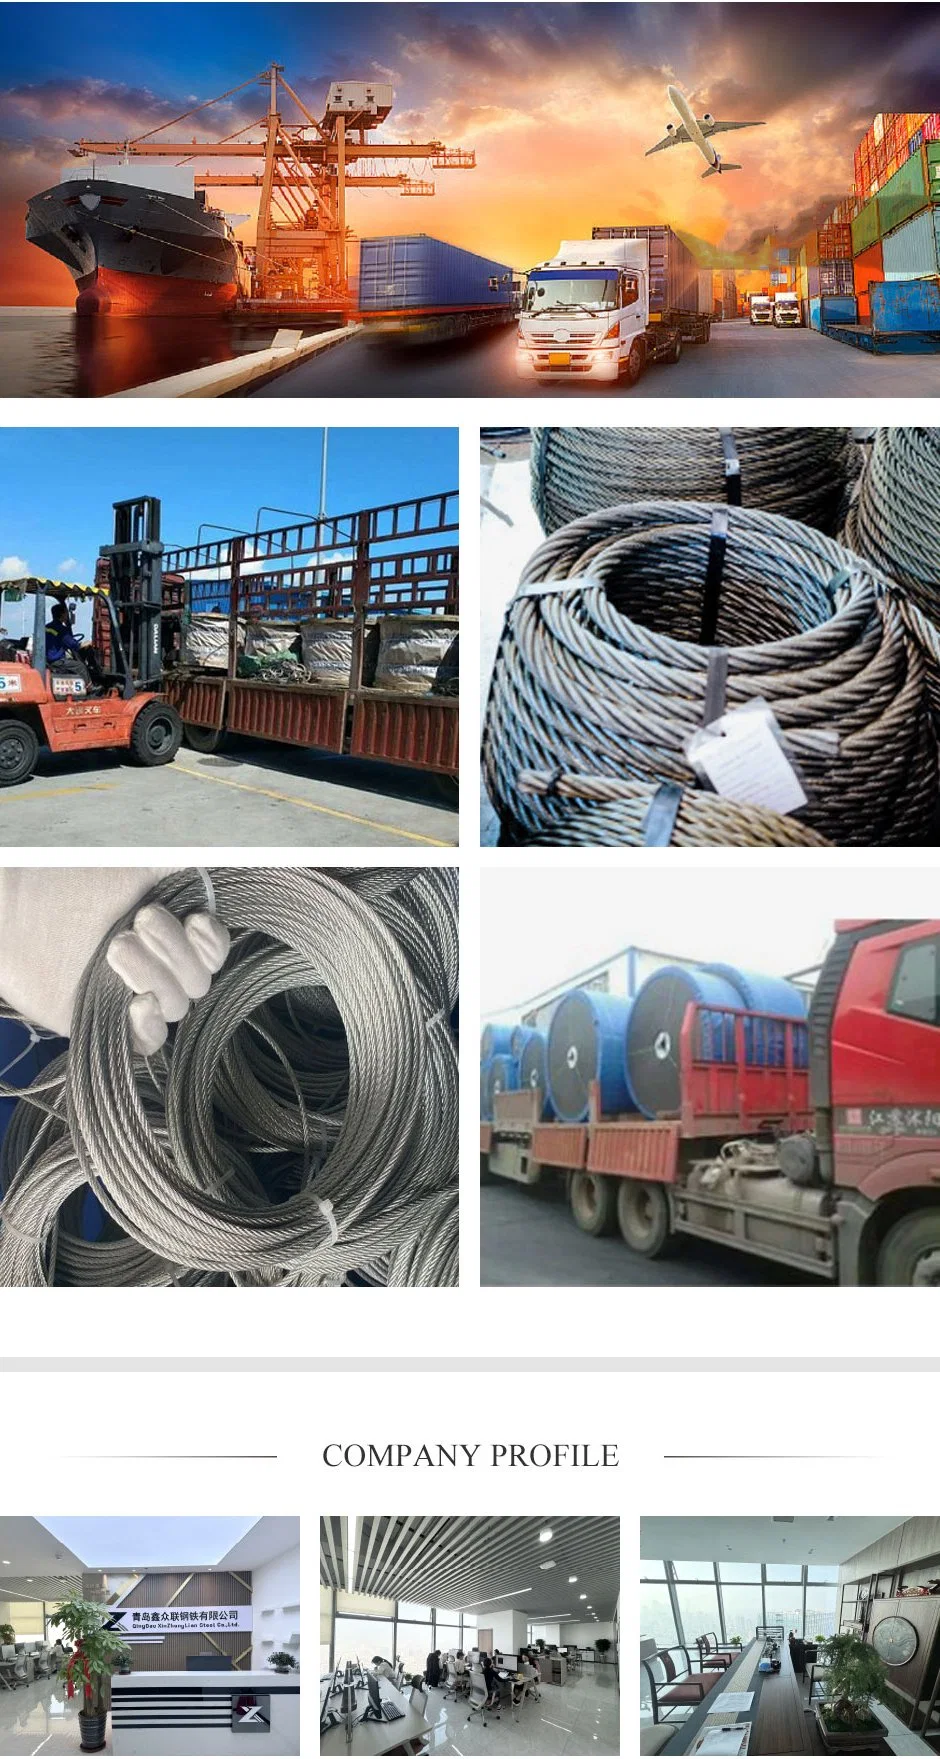 PE Coated Wire 2mm/4mm Stainless Steel Wire 304 / 304L / 316 / 316L Stainless Steel Wire Rope Rod Stainless Steel Wire Strand